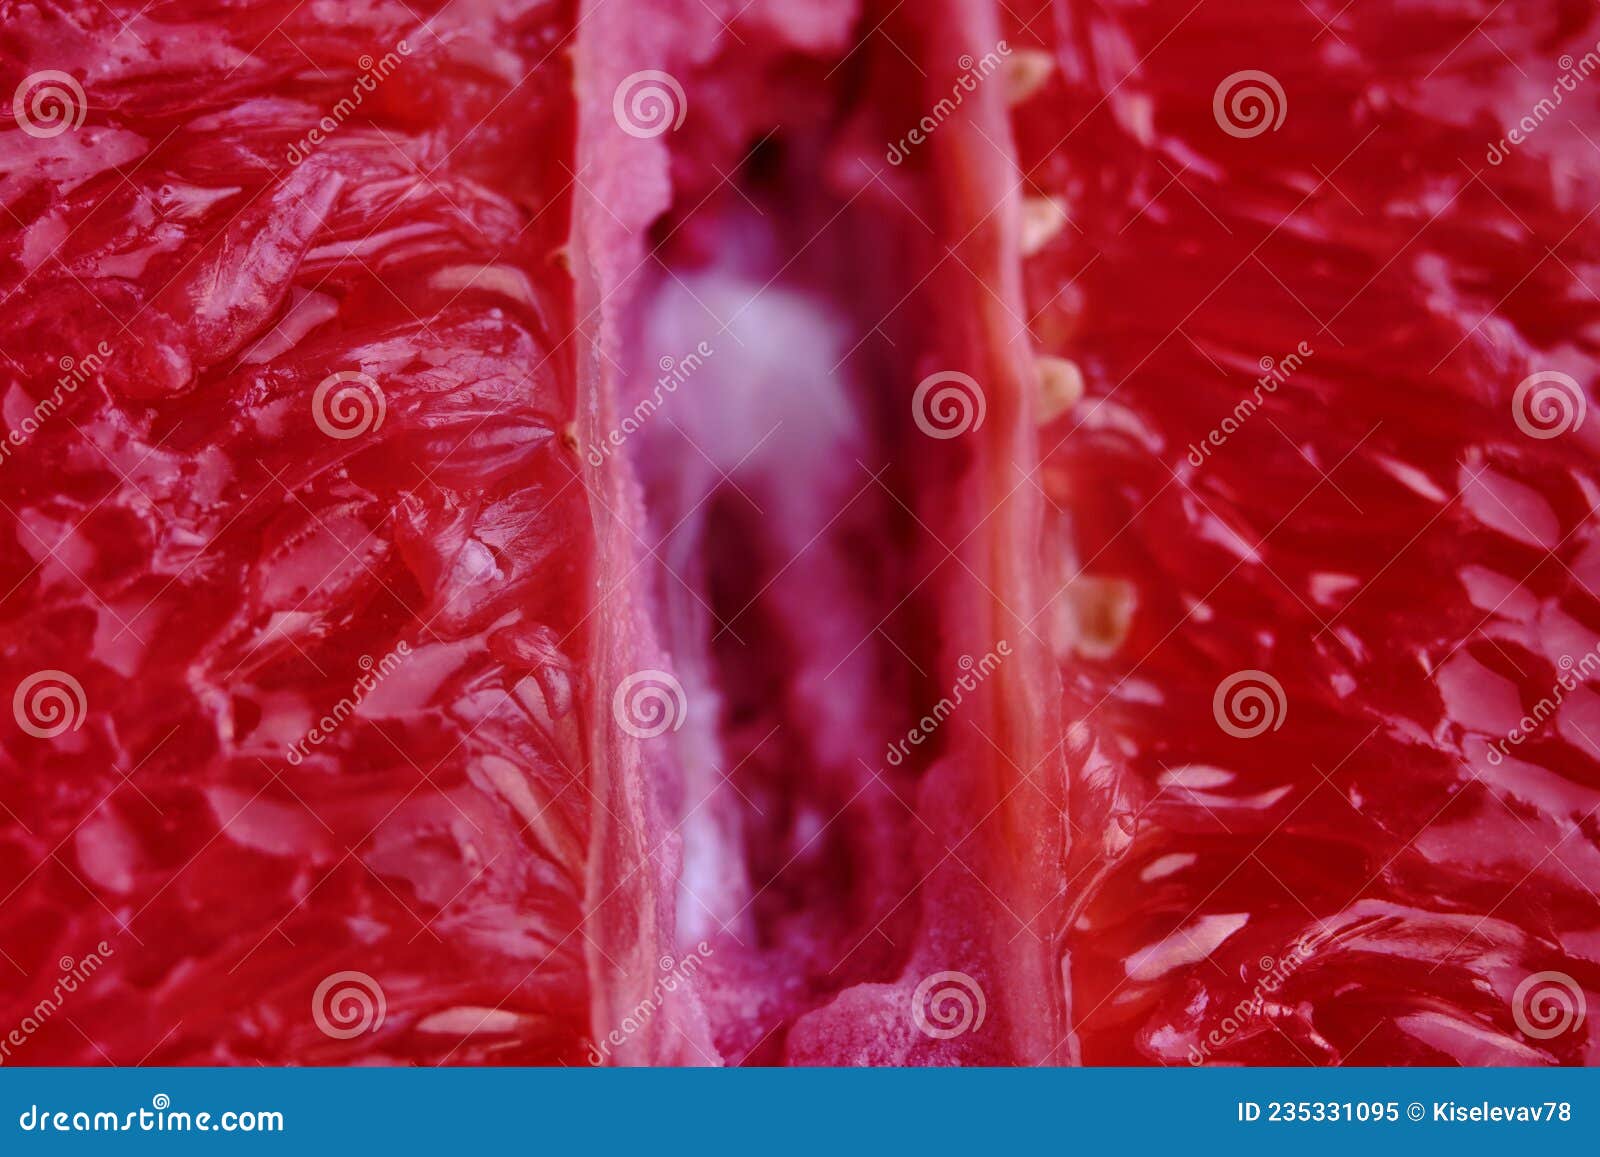 Extreme Close Up Pussy Porn - Blurred Photo of a Grapefruit Close-up. Vagina and Sperm Symbol Stock Image  - Image of pink, sensual: 235331095